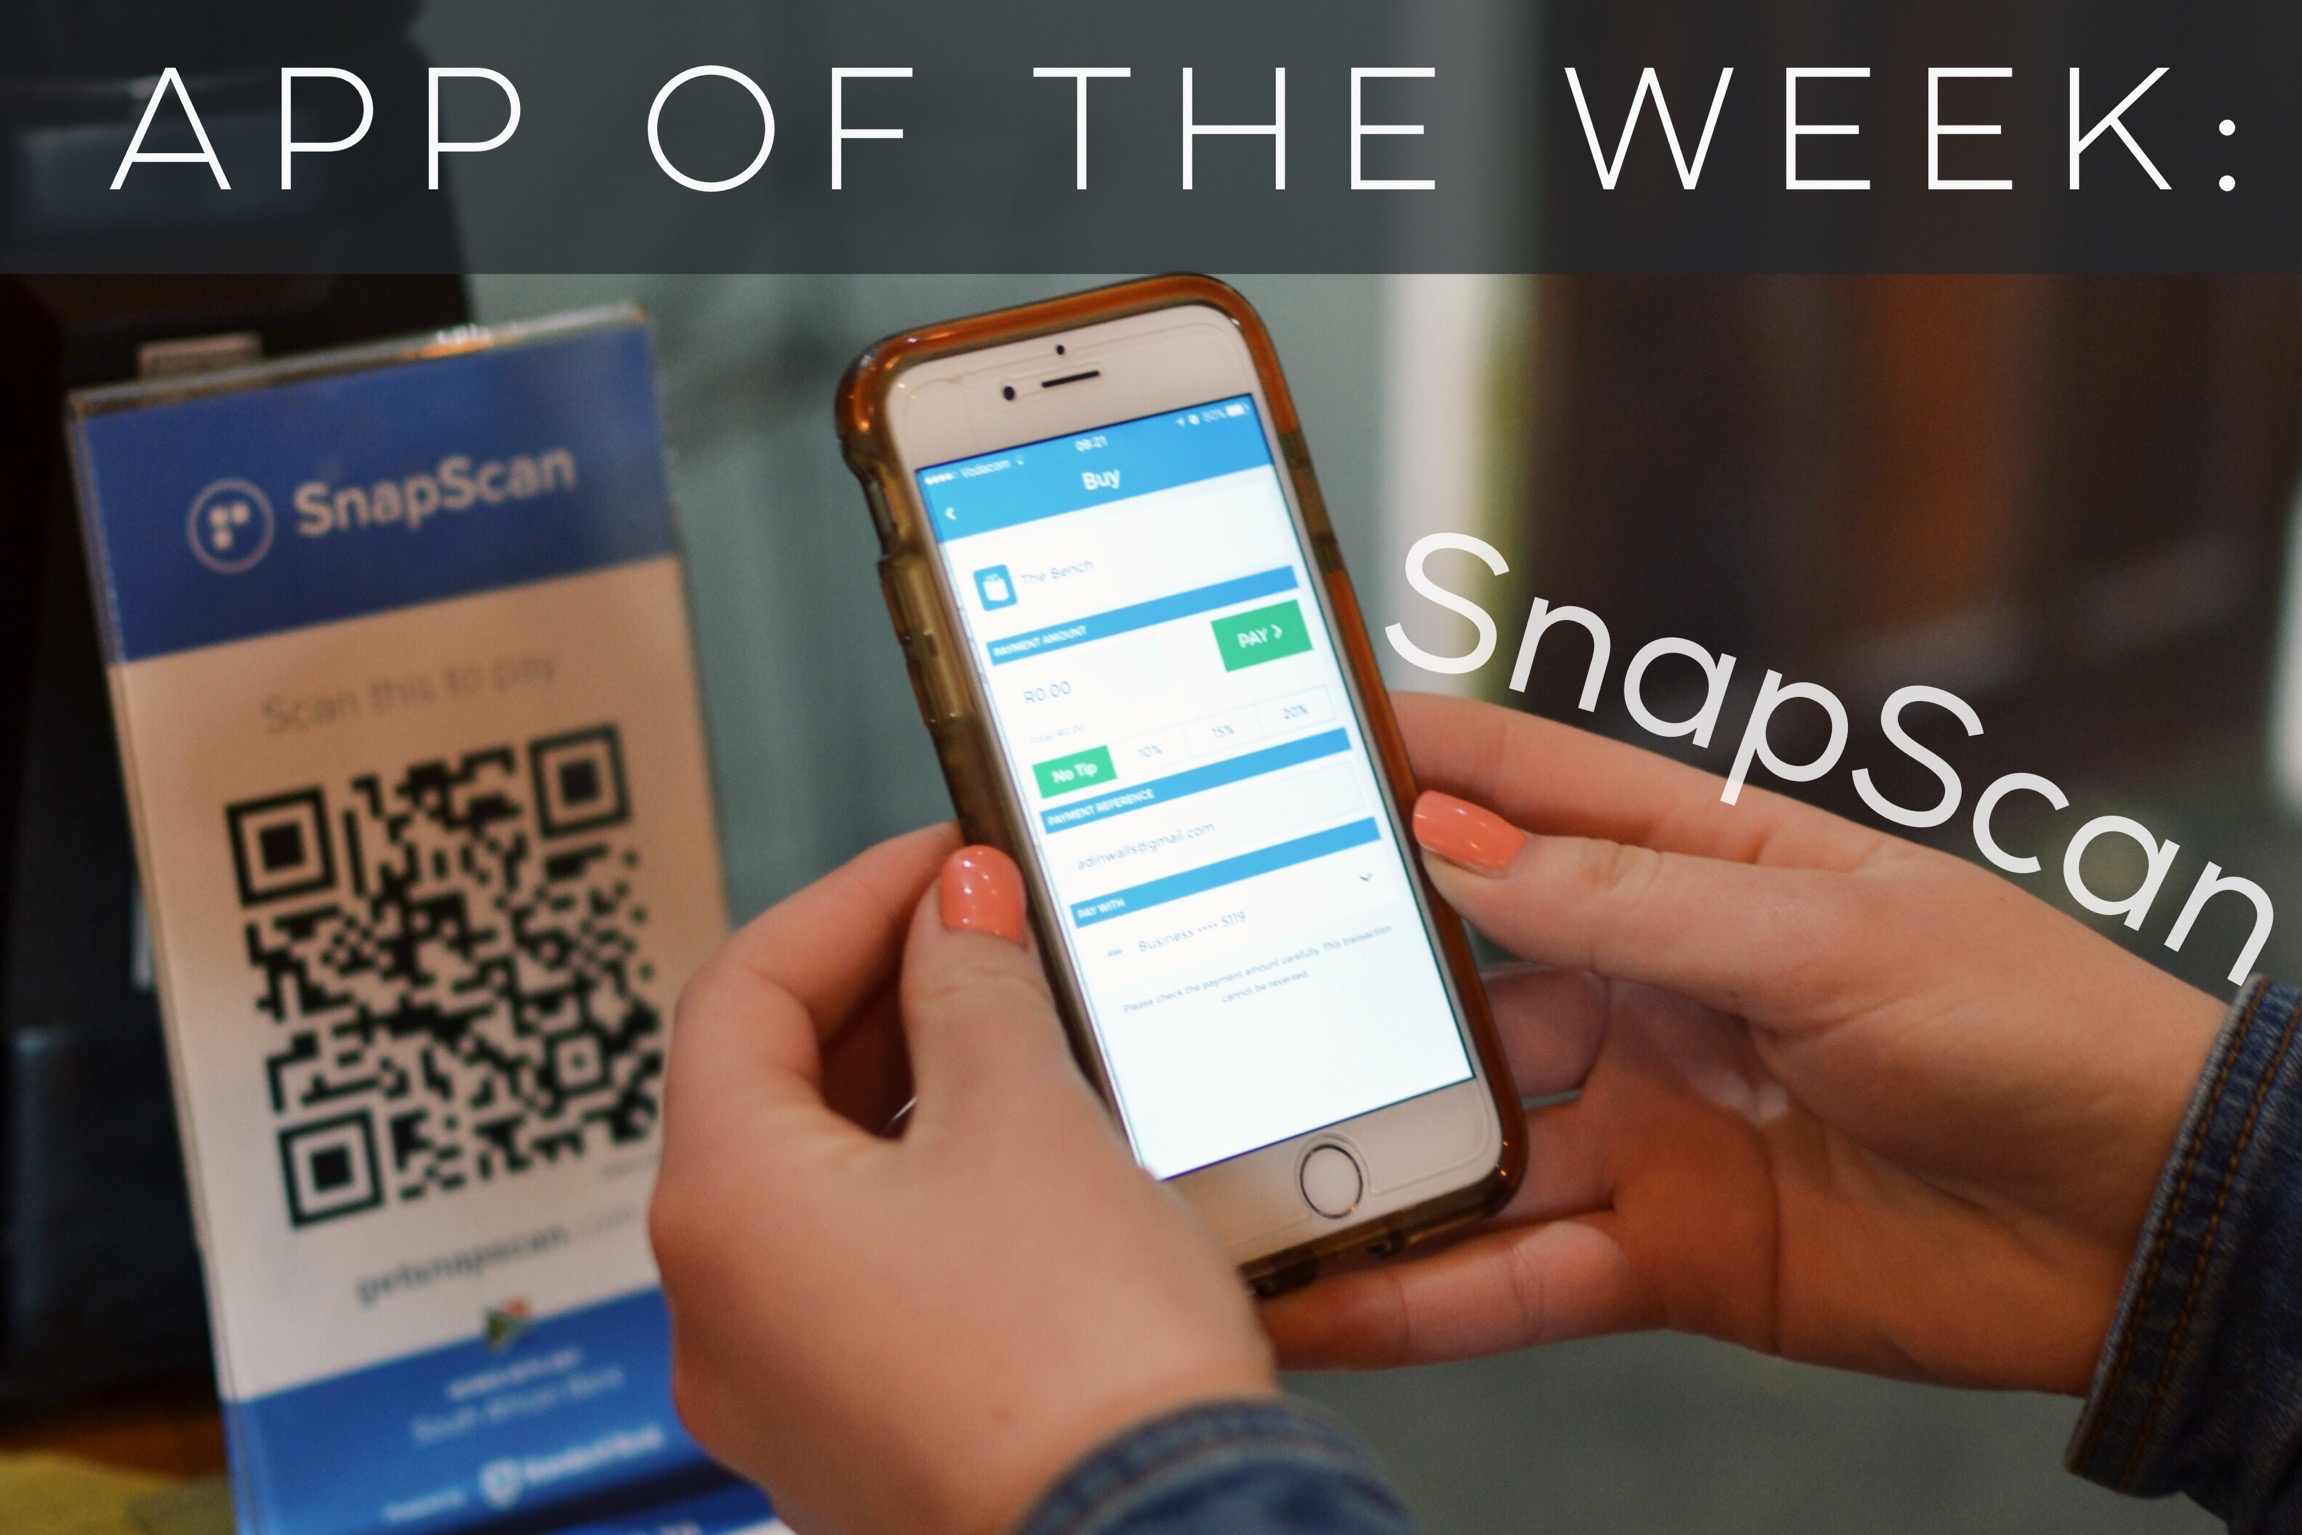 SnapScan – digital payments FTW (Proudly South African)